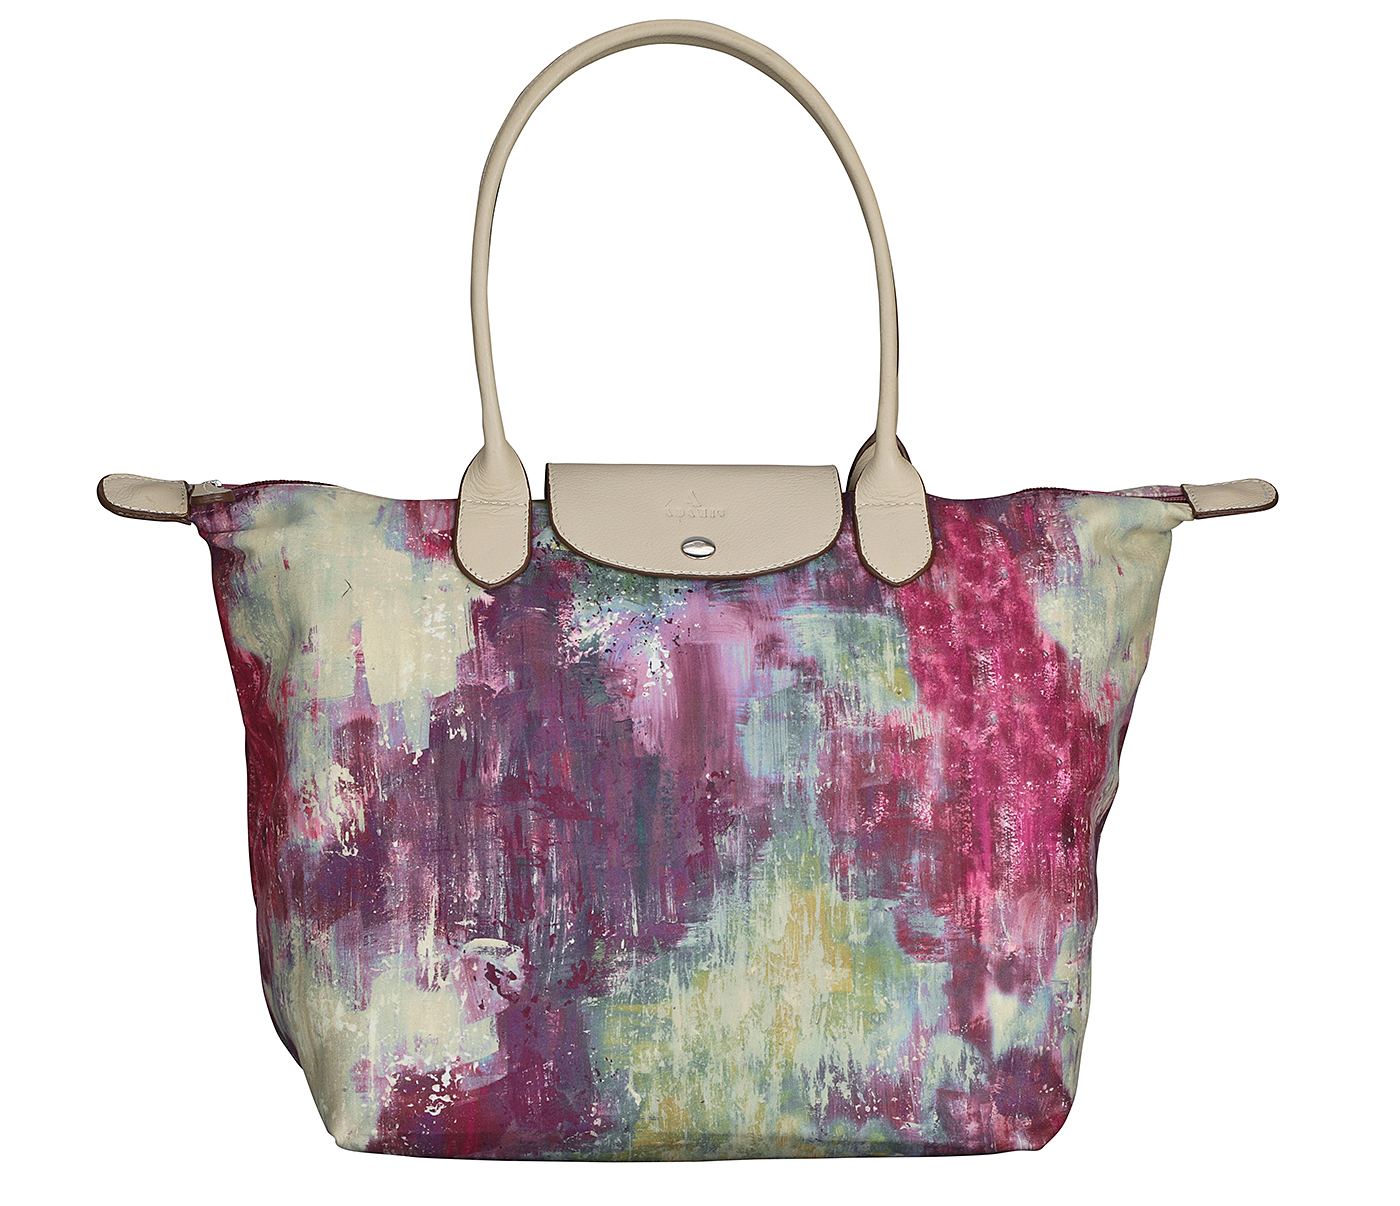 B882--Adelina Folding Tote Bag In Leaf Print Material With Genuine Leather Handles And Flap - Wine